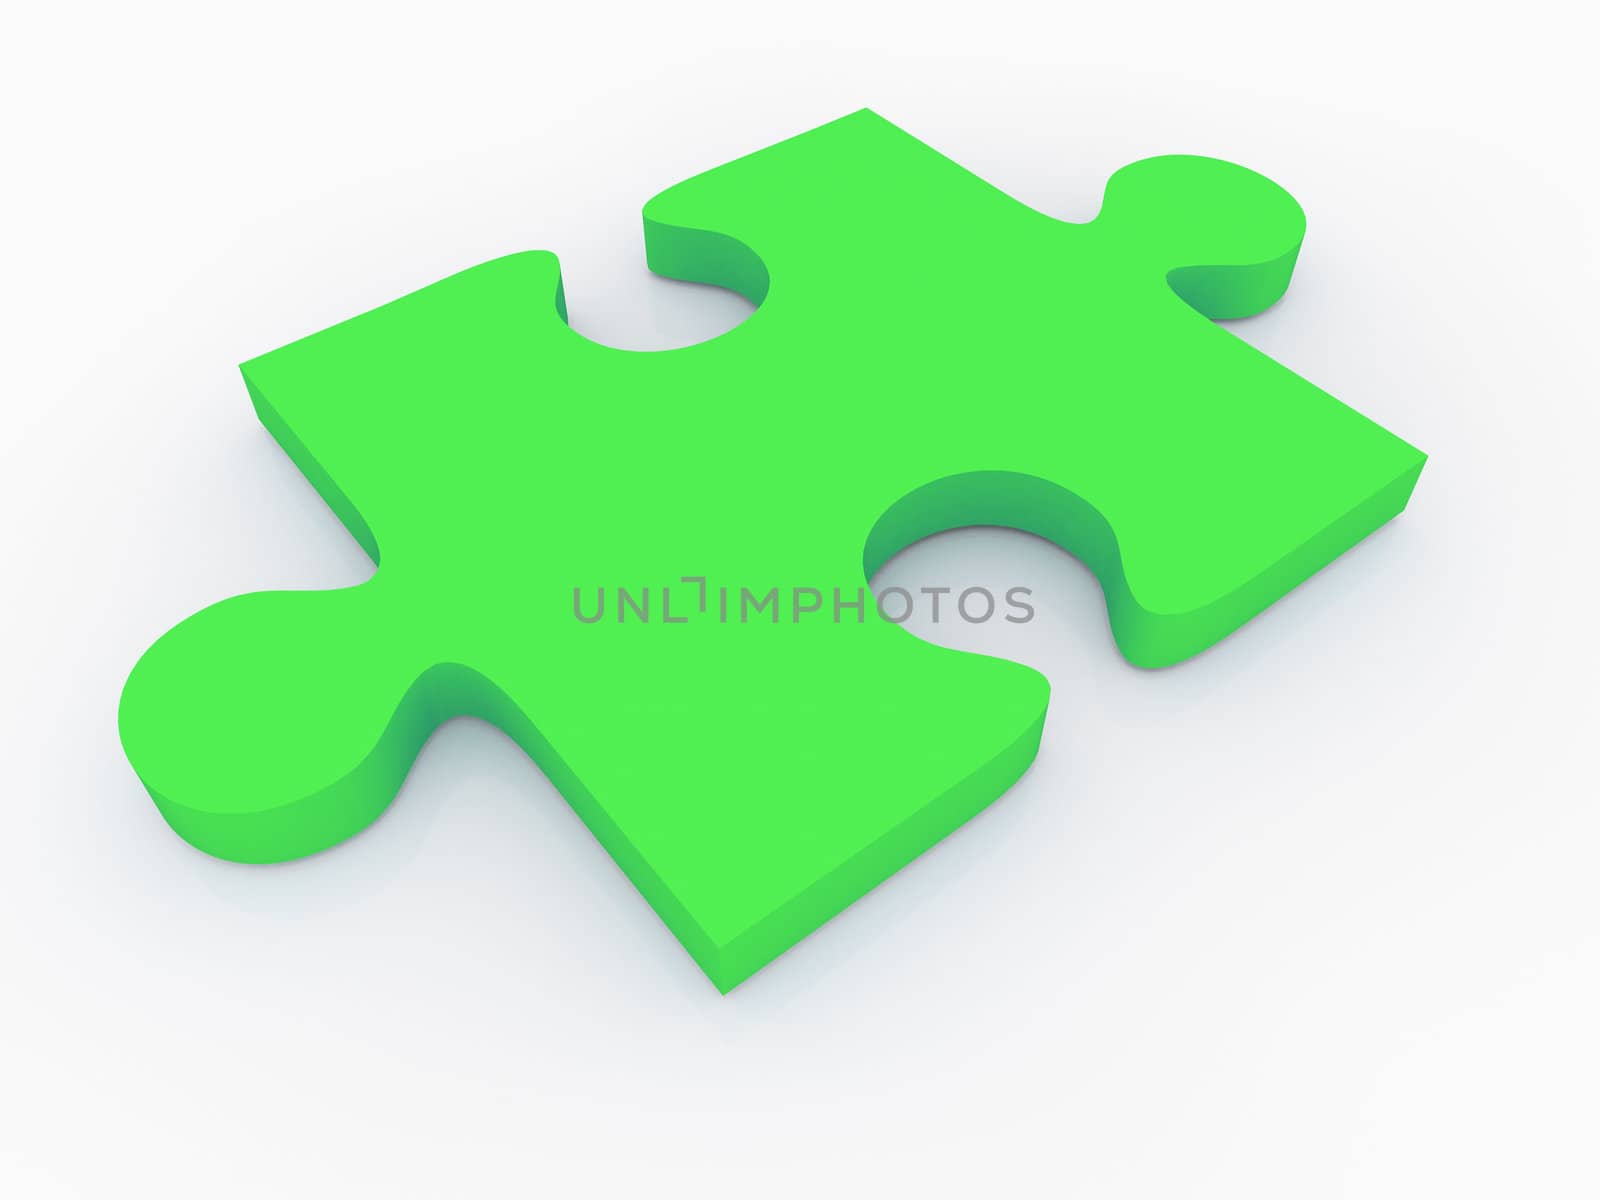 Single green color puzzle concept on white background.